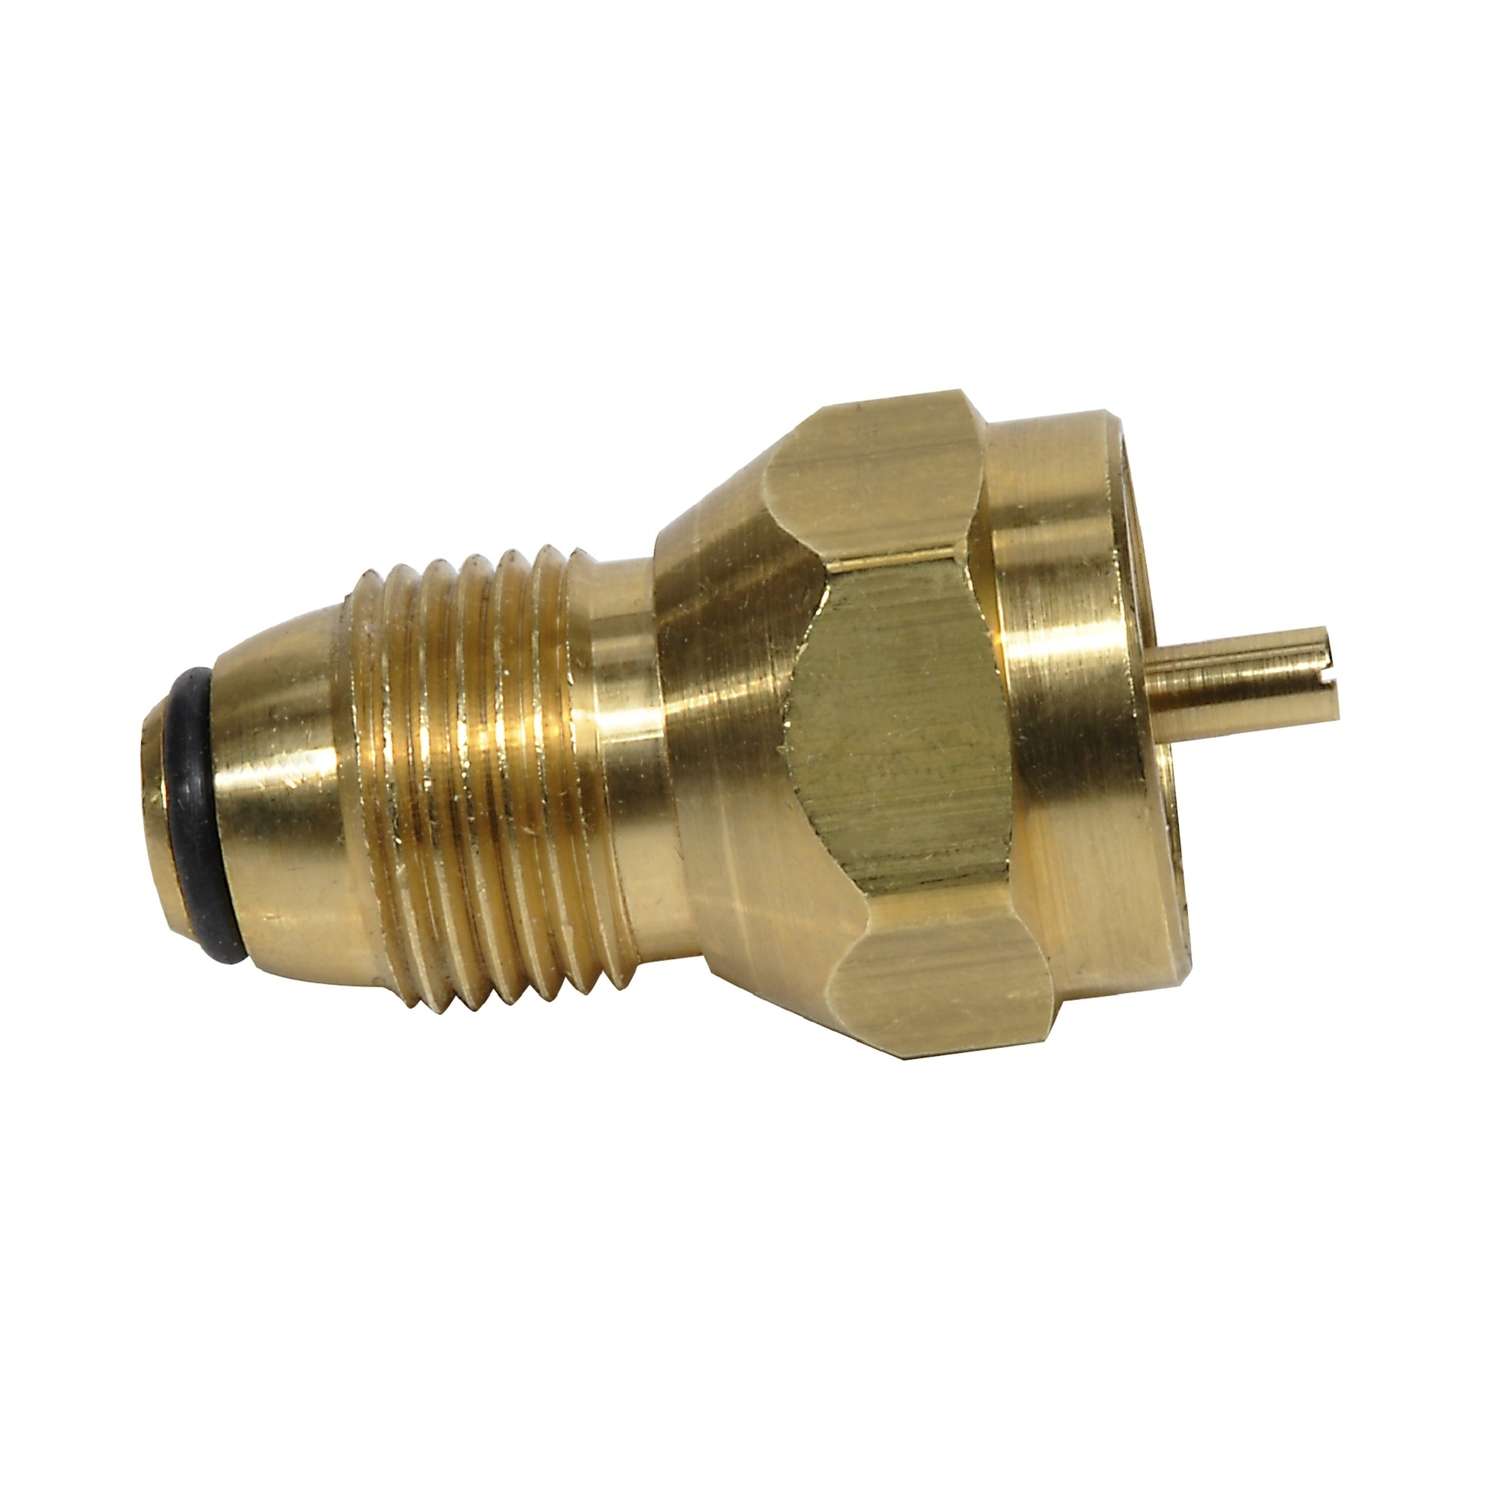 Propane Tank Adapter Wrench/Remover，Disassemble Propane/LP Cylinders  Pressure Valve Or ON/Off Control Valve Tool Accessories